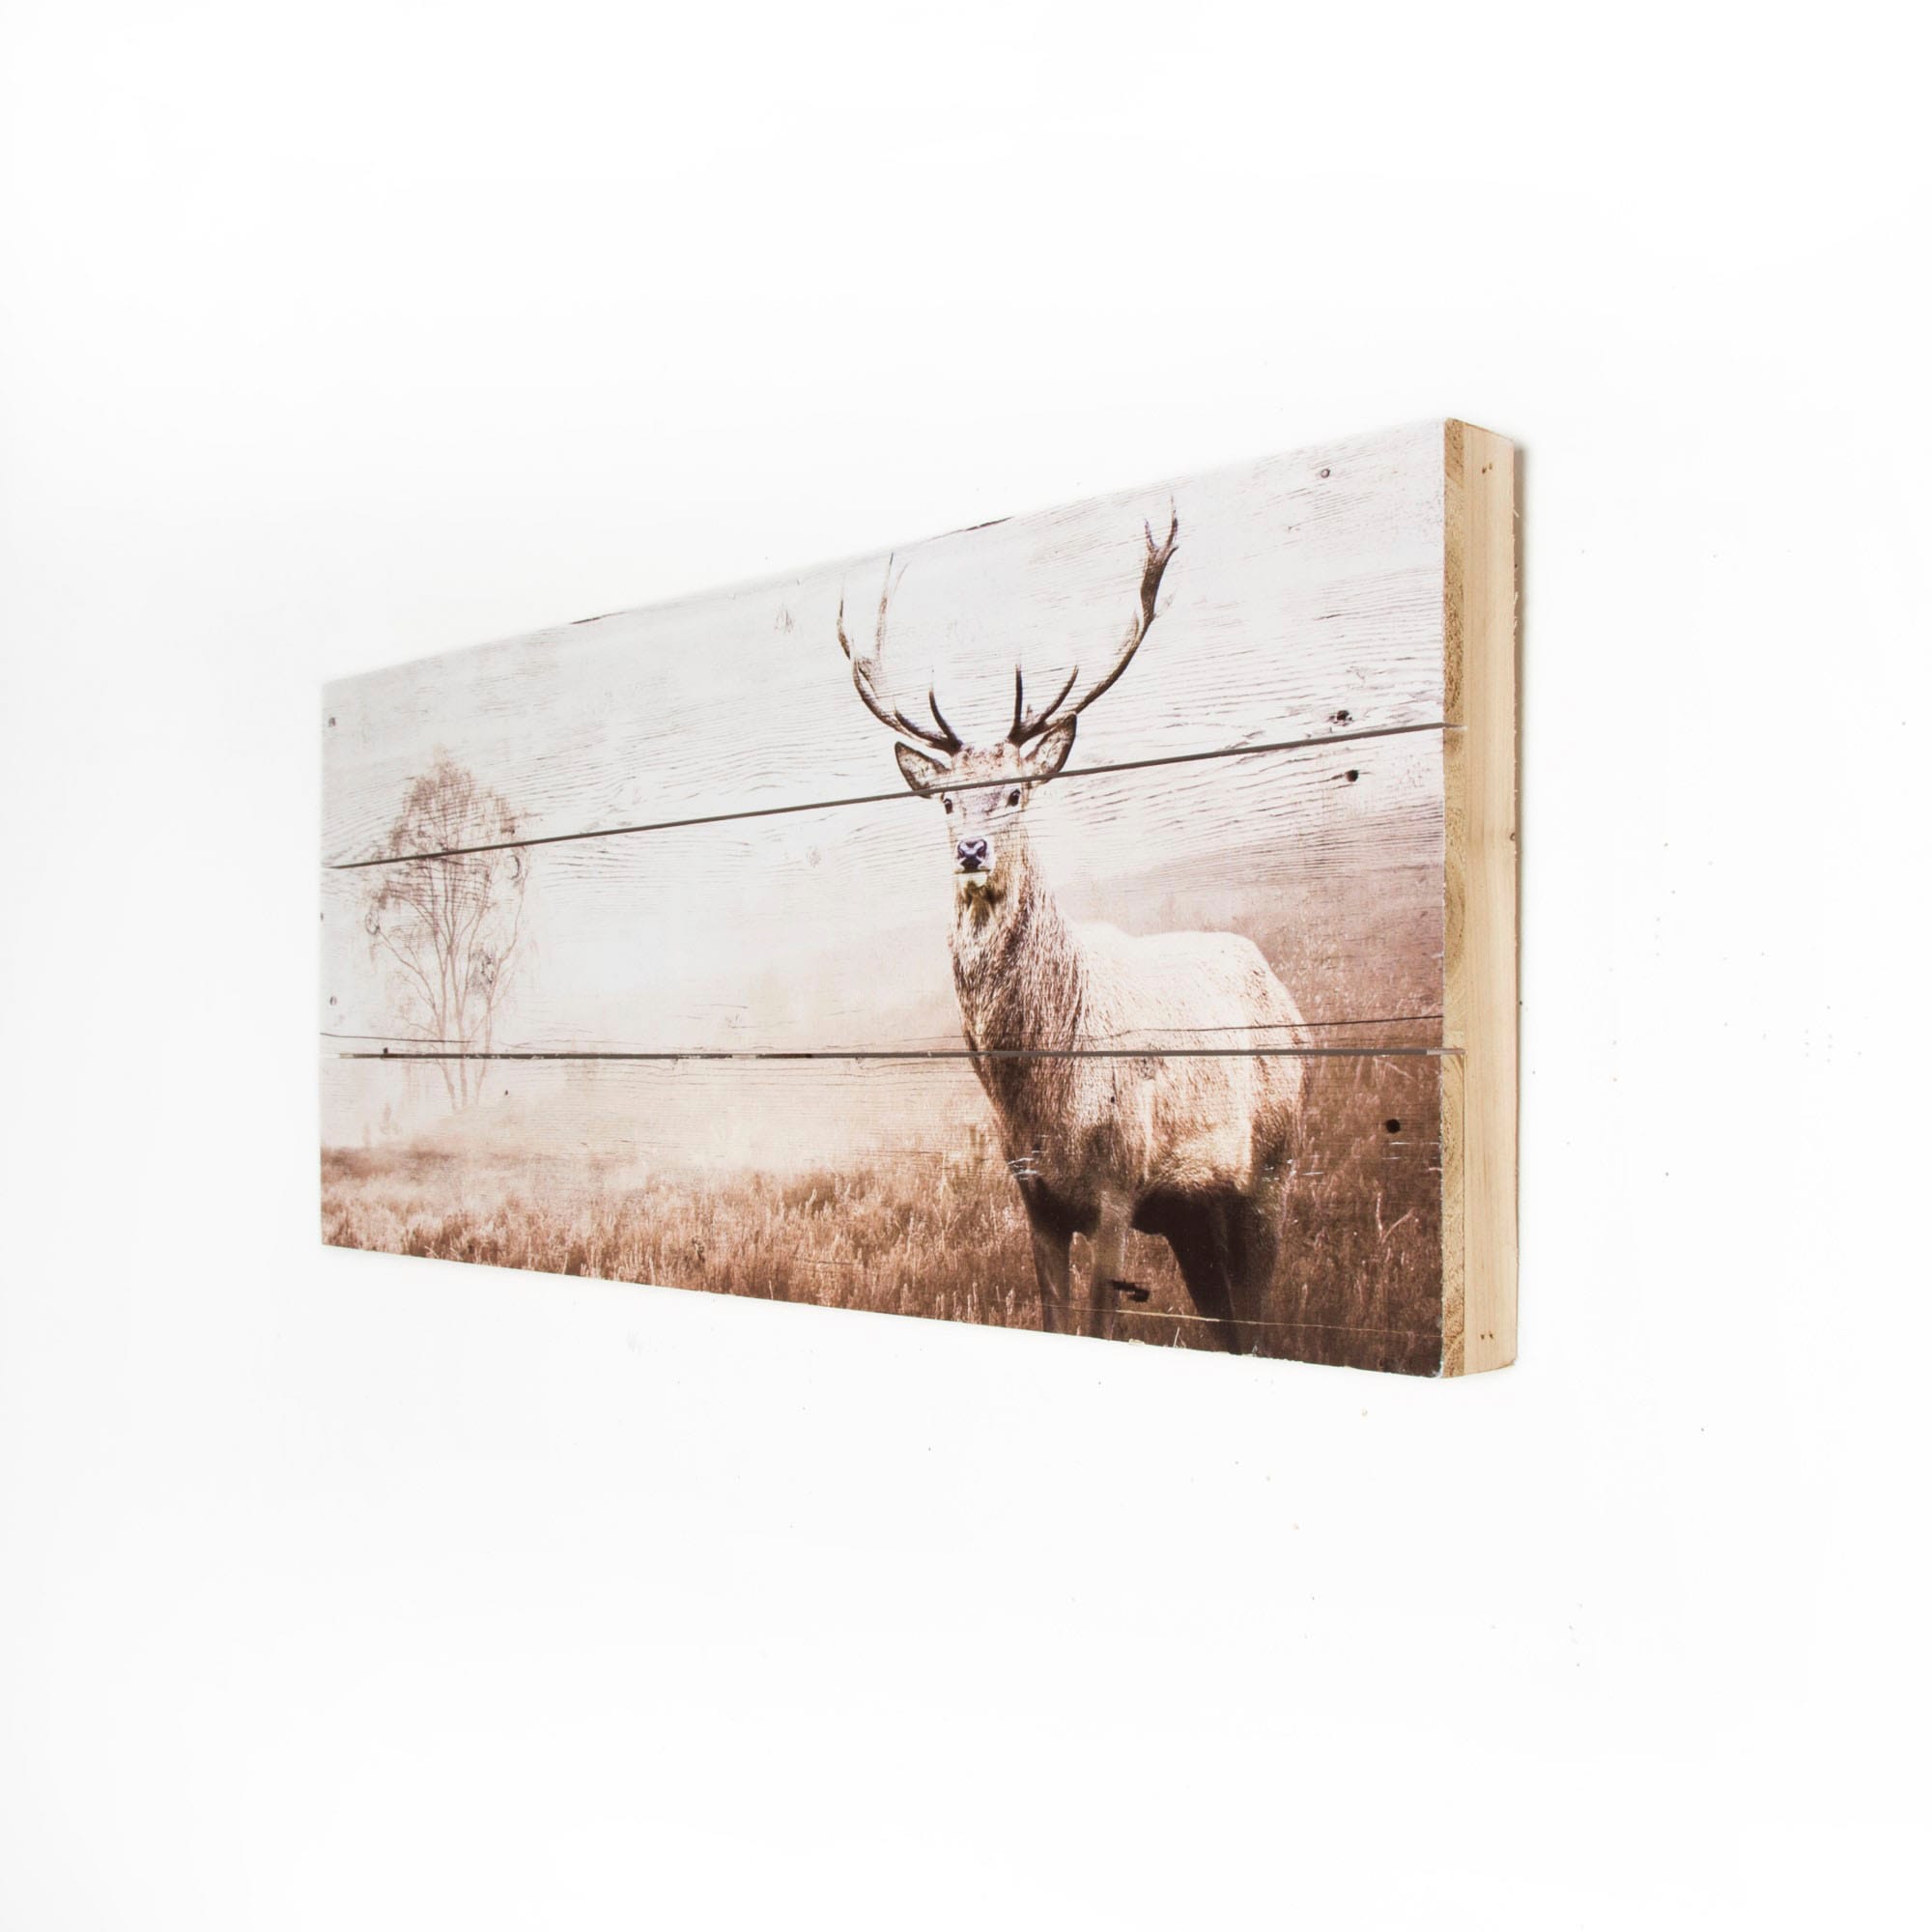 Art for the home Holzbild »Stag«, Hirsche